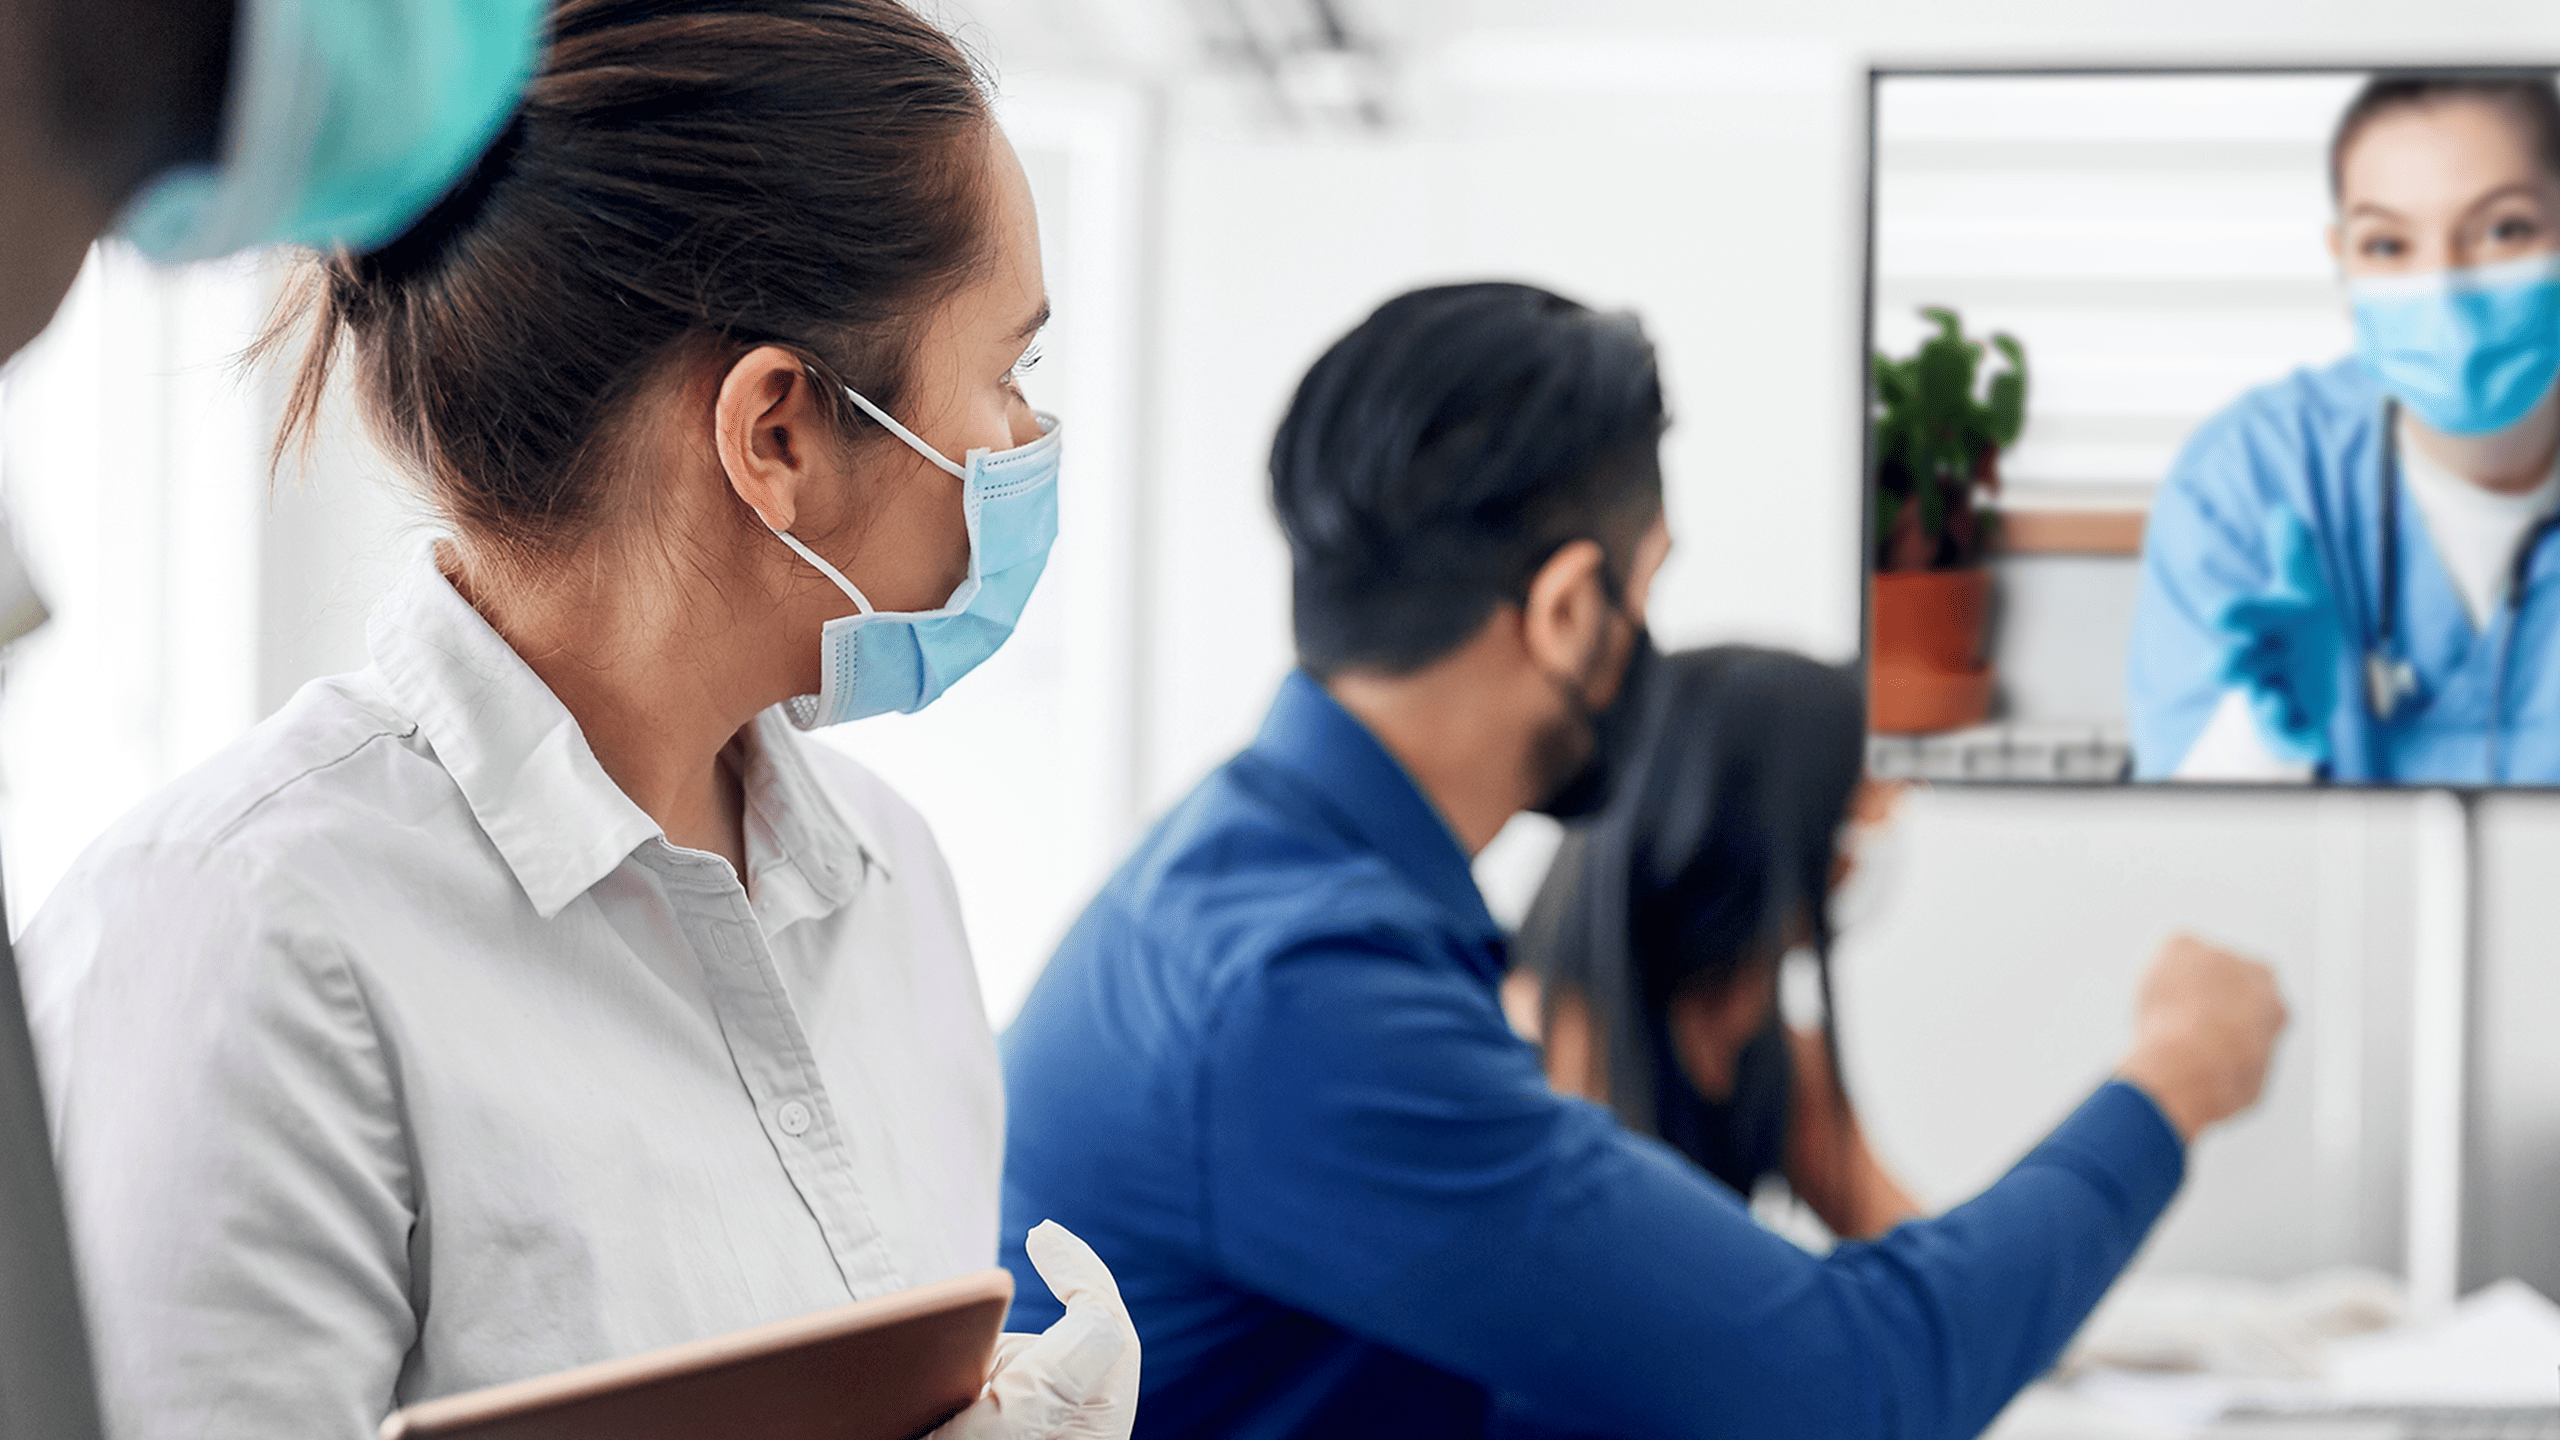 Virtual collaboration with a physician